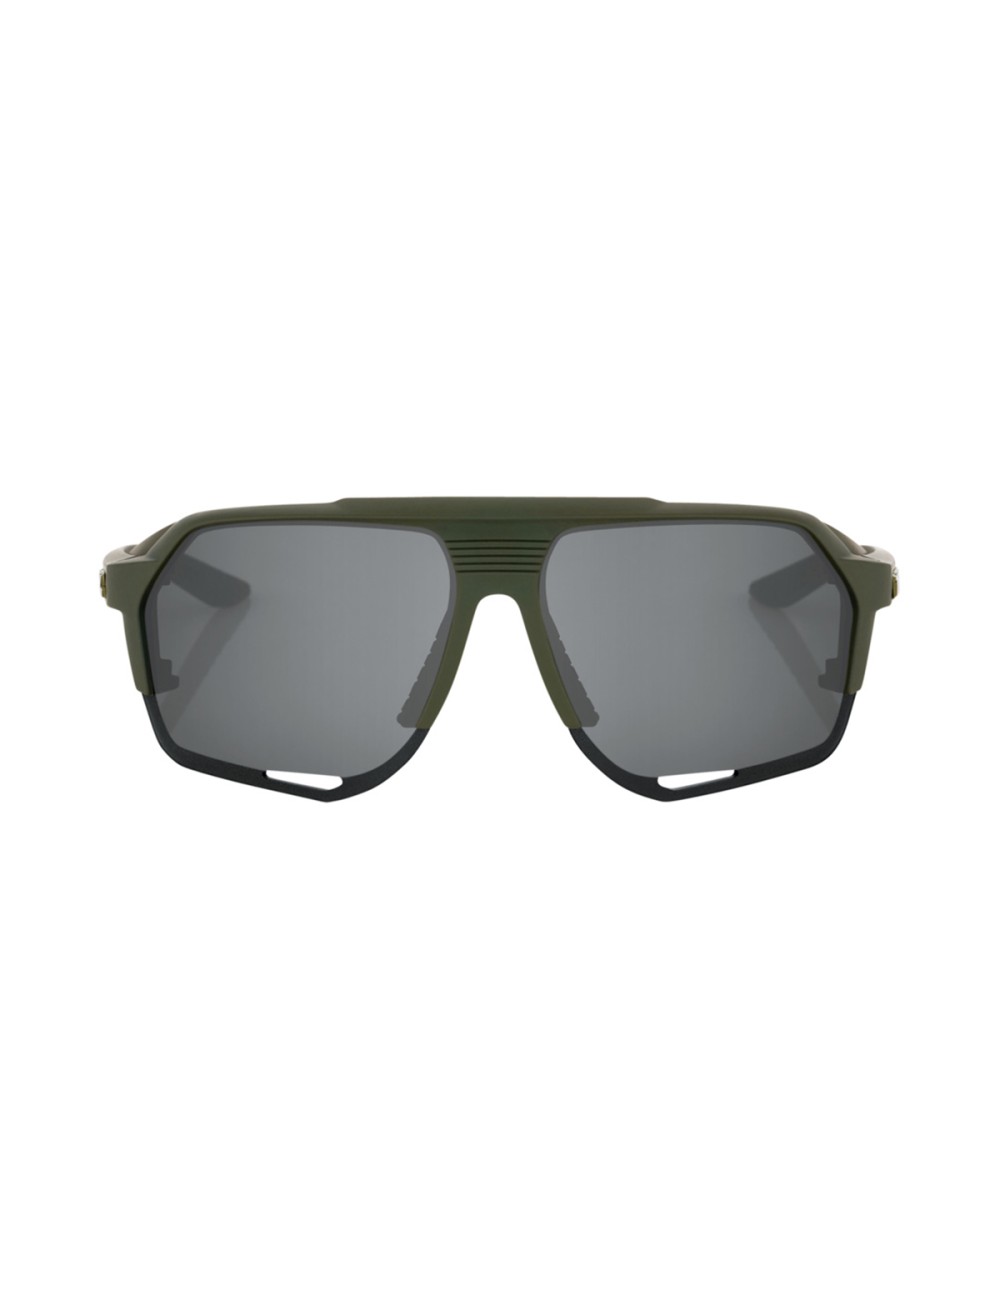 100 Norvik Glases Soft Tact - Army Green